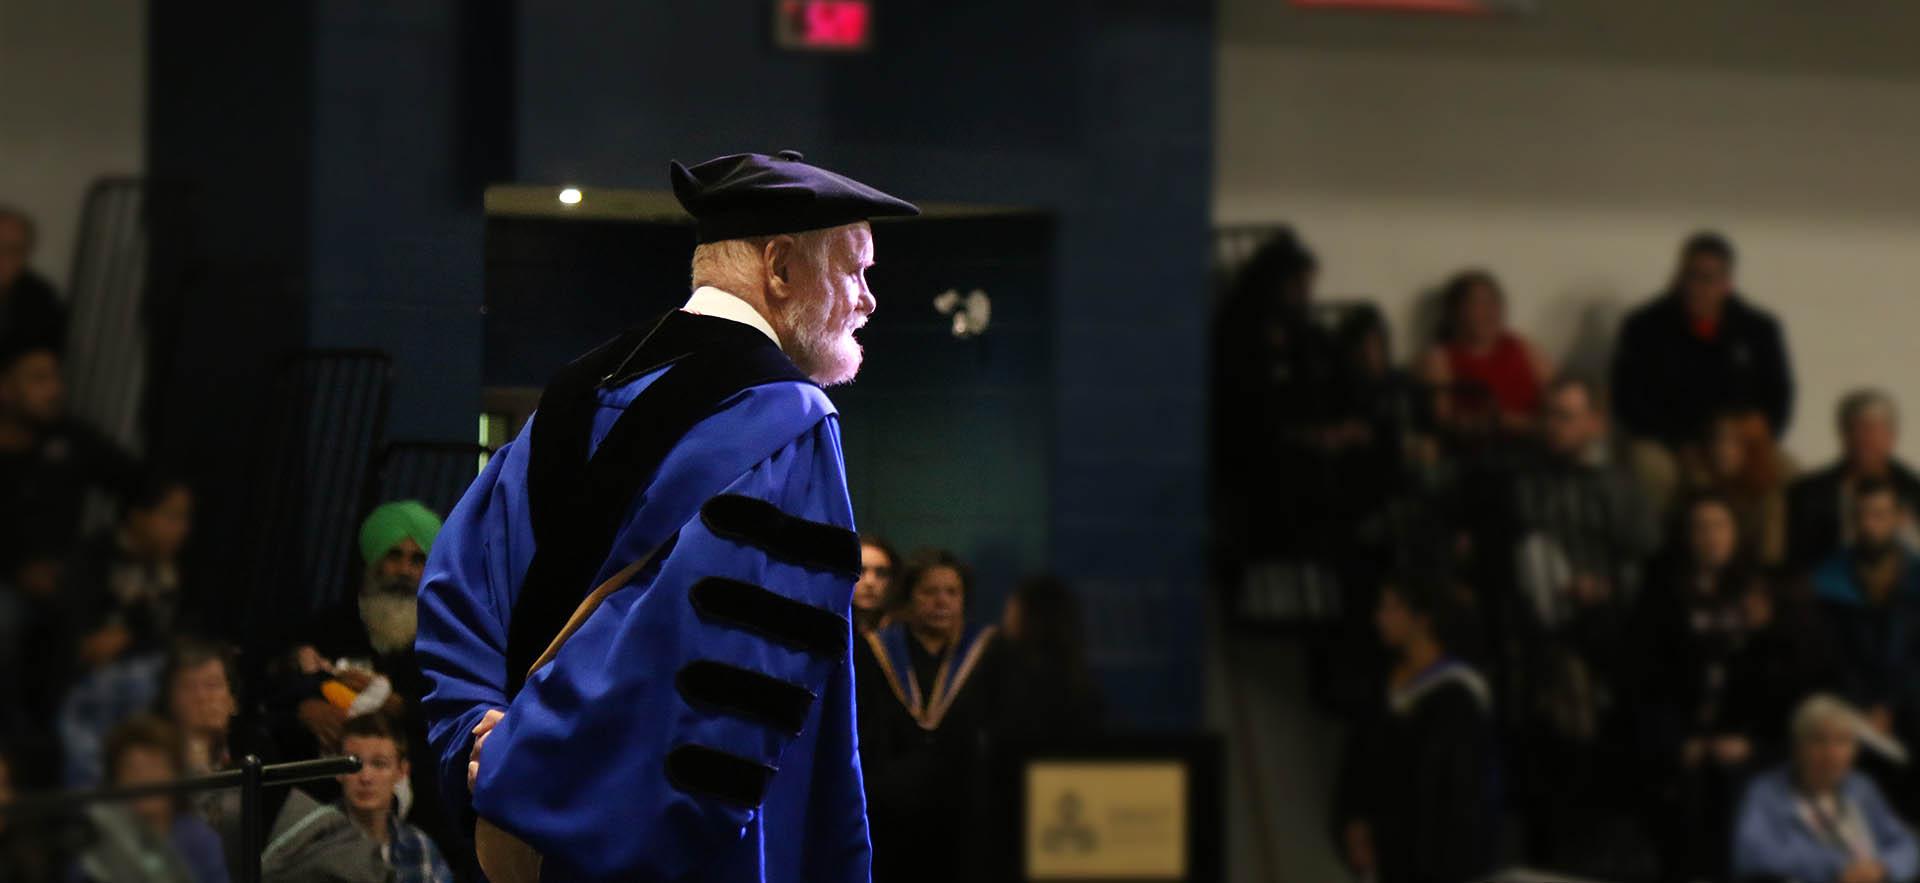 President Dr. Ron Common in convocation gown